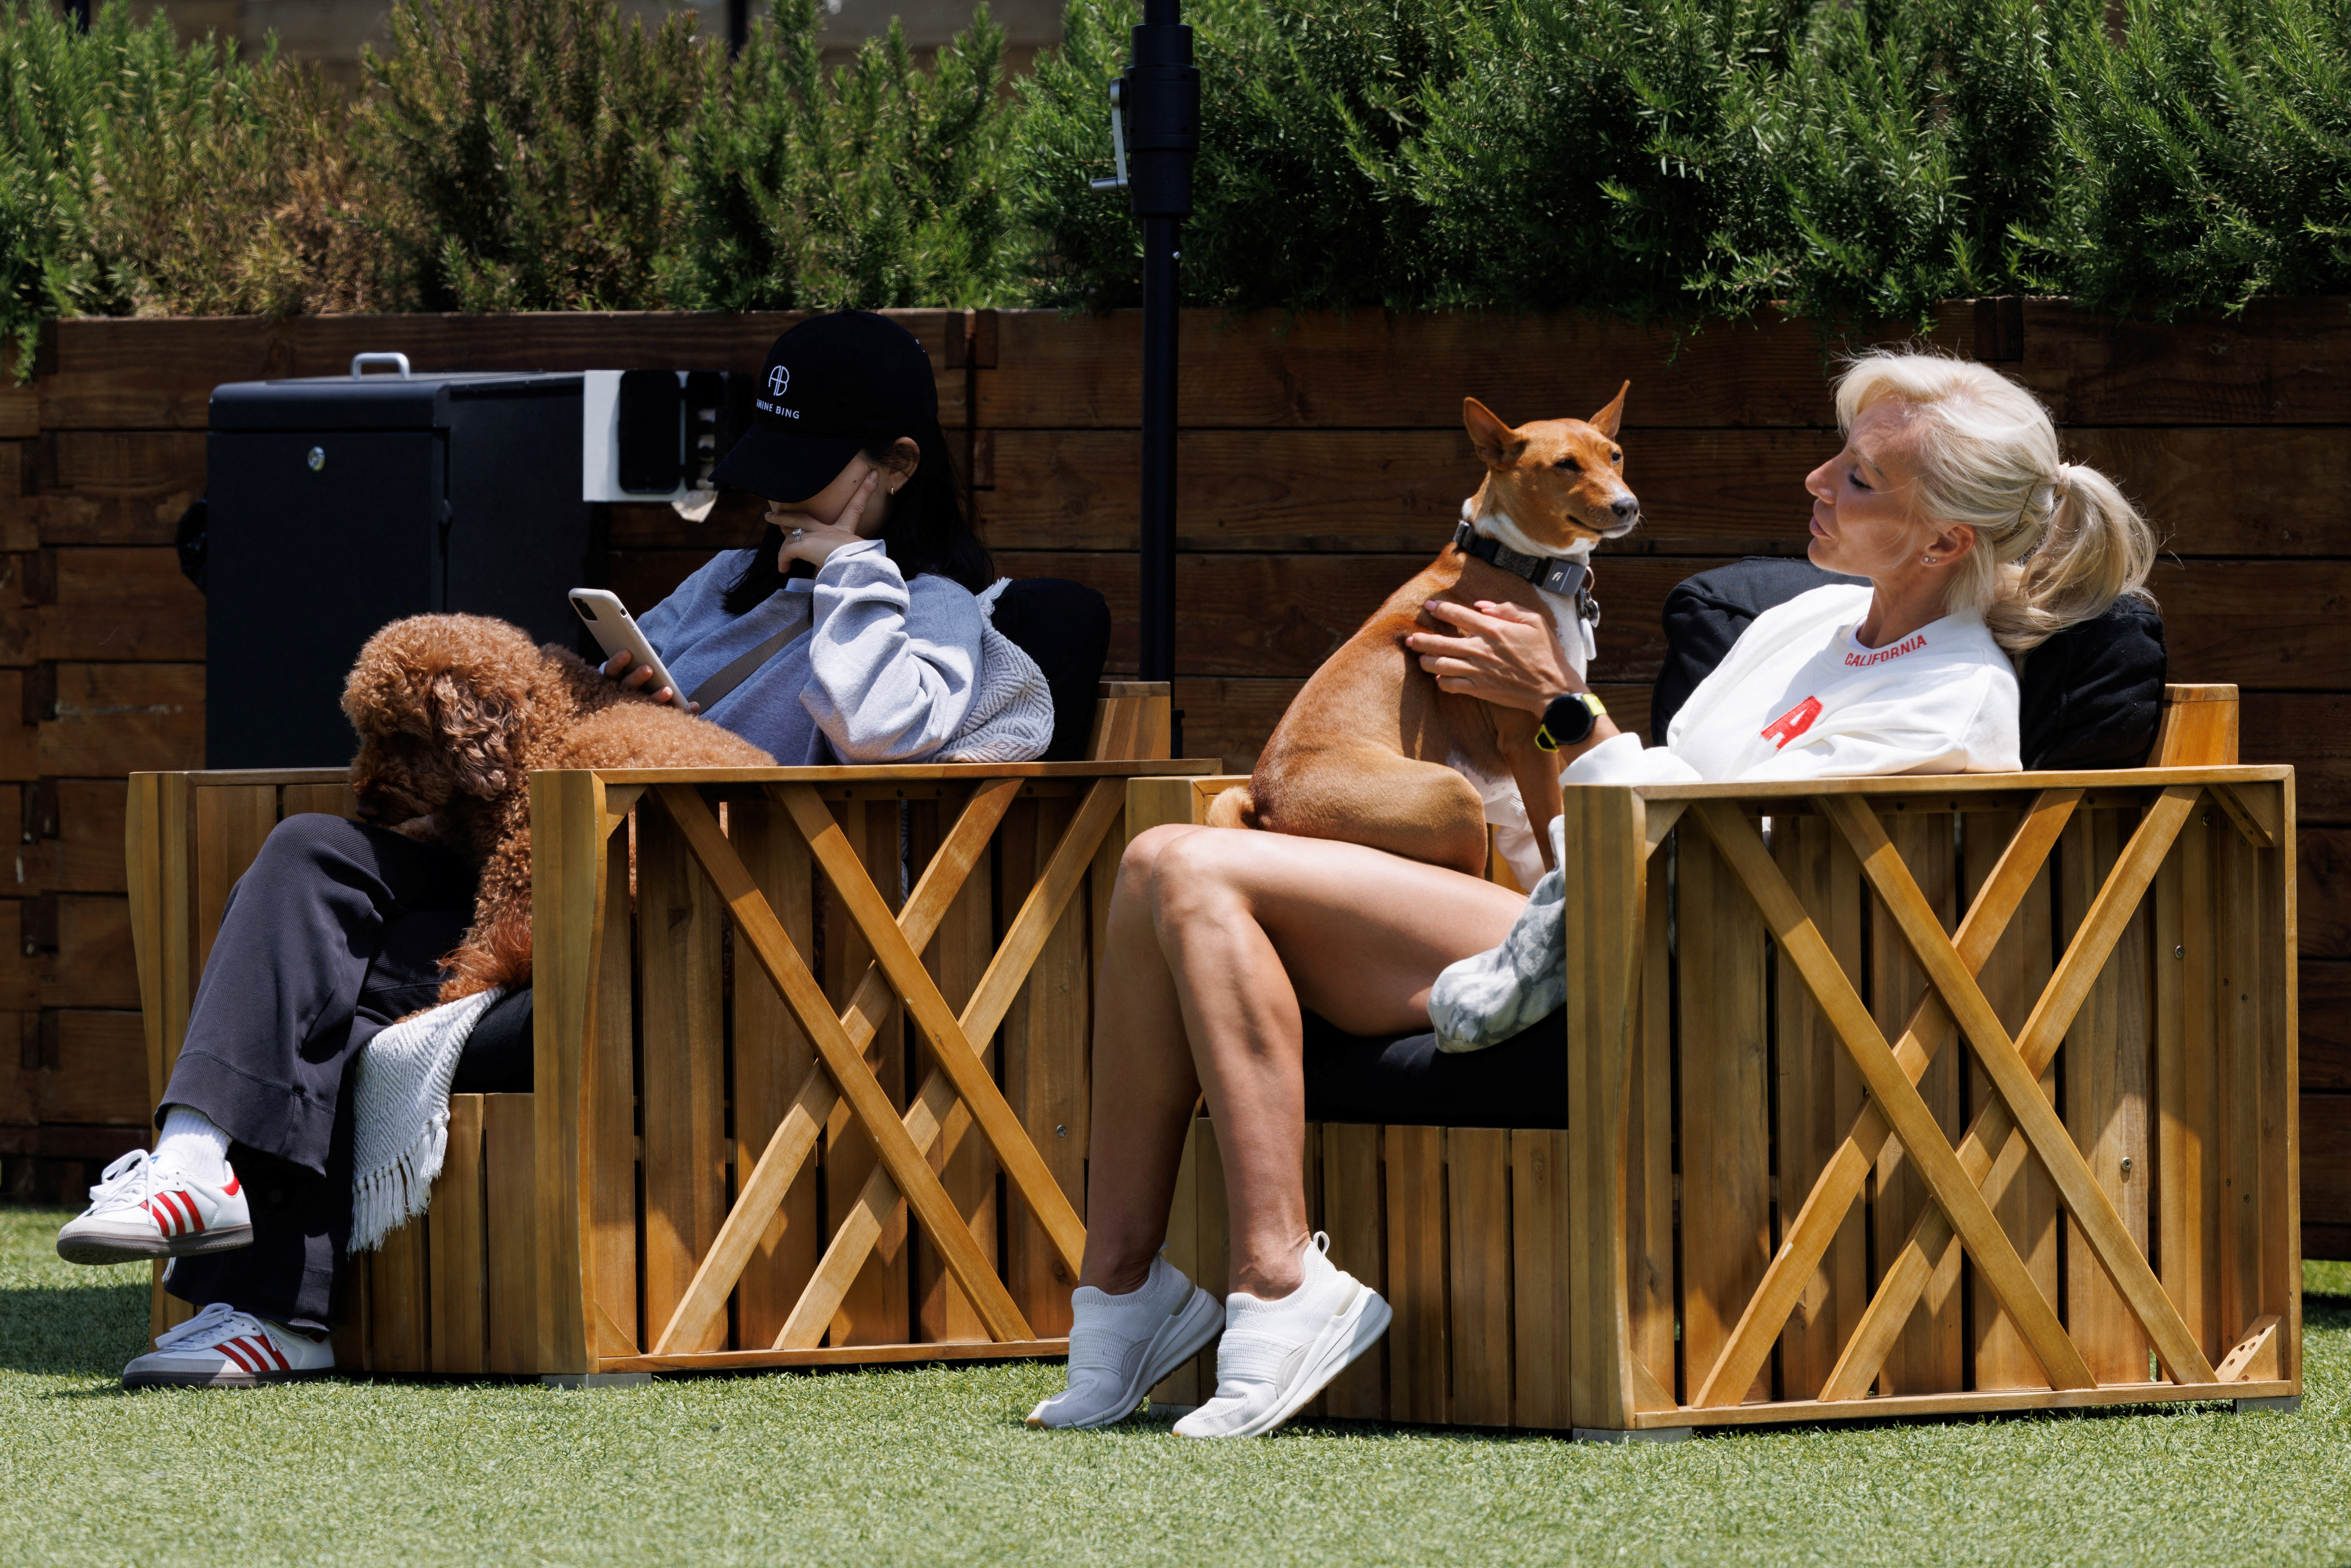 DOG PPL, a private members' club for dogs in the Californian beach enclave of Santa Monica